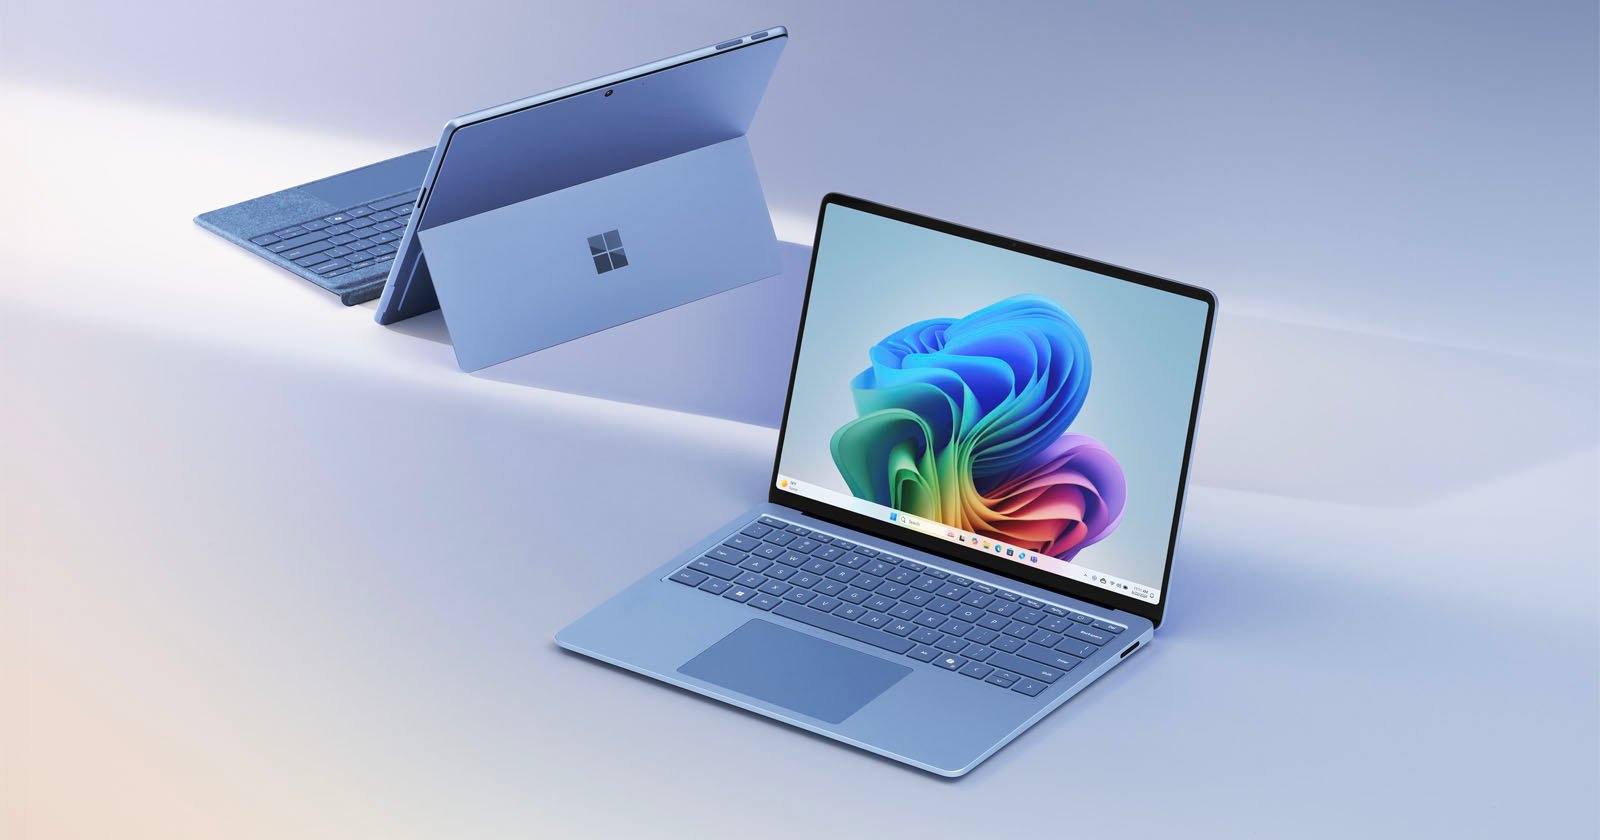 Microsoft Believes Its New Surface Laptop Is an AI-Powered Mac Killer